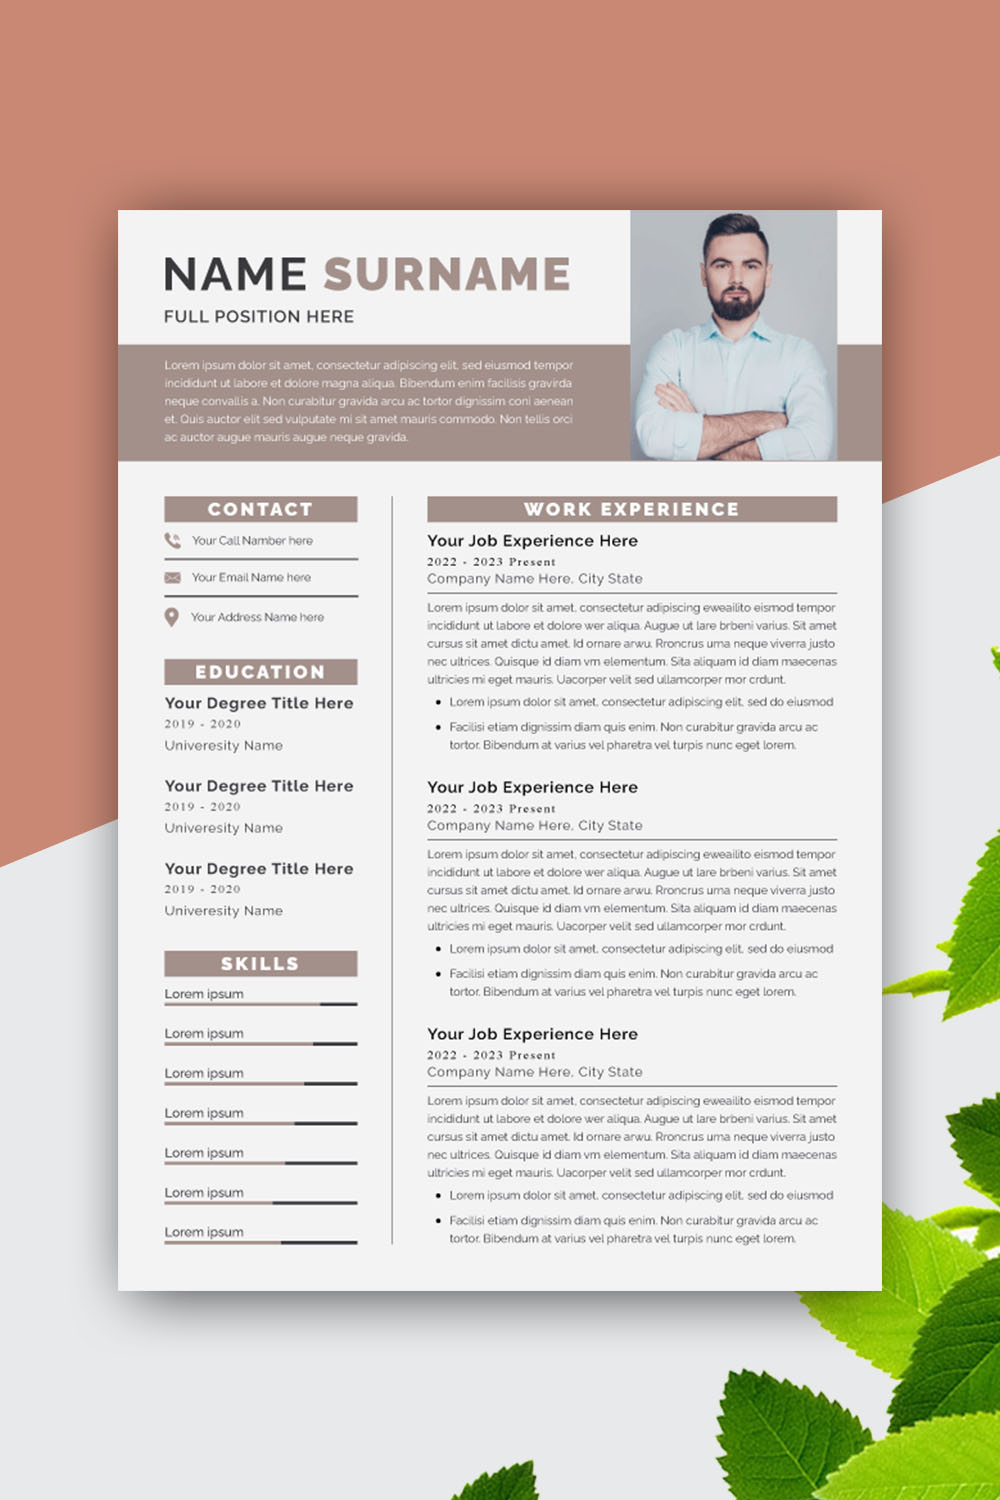 Clean Resume Layout Resume Template Design pinterest preview image.